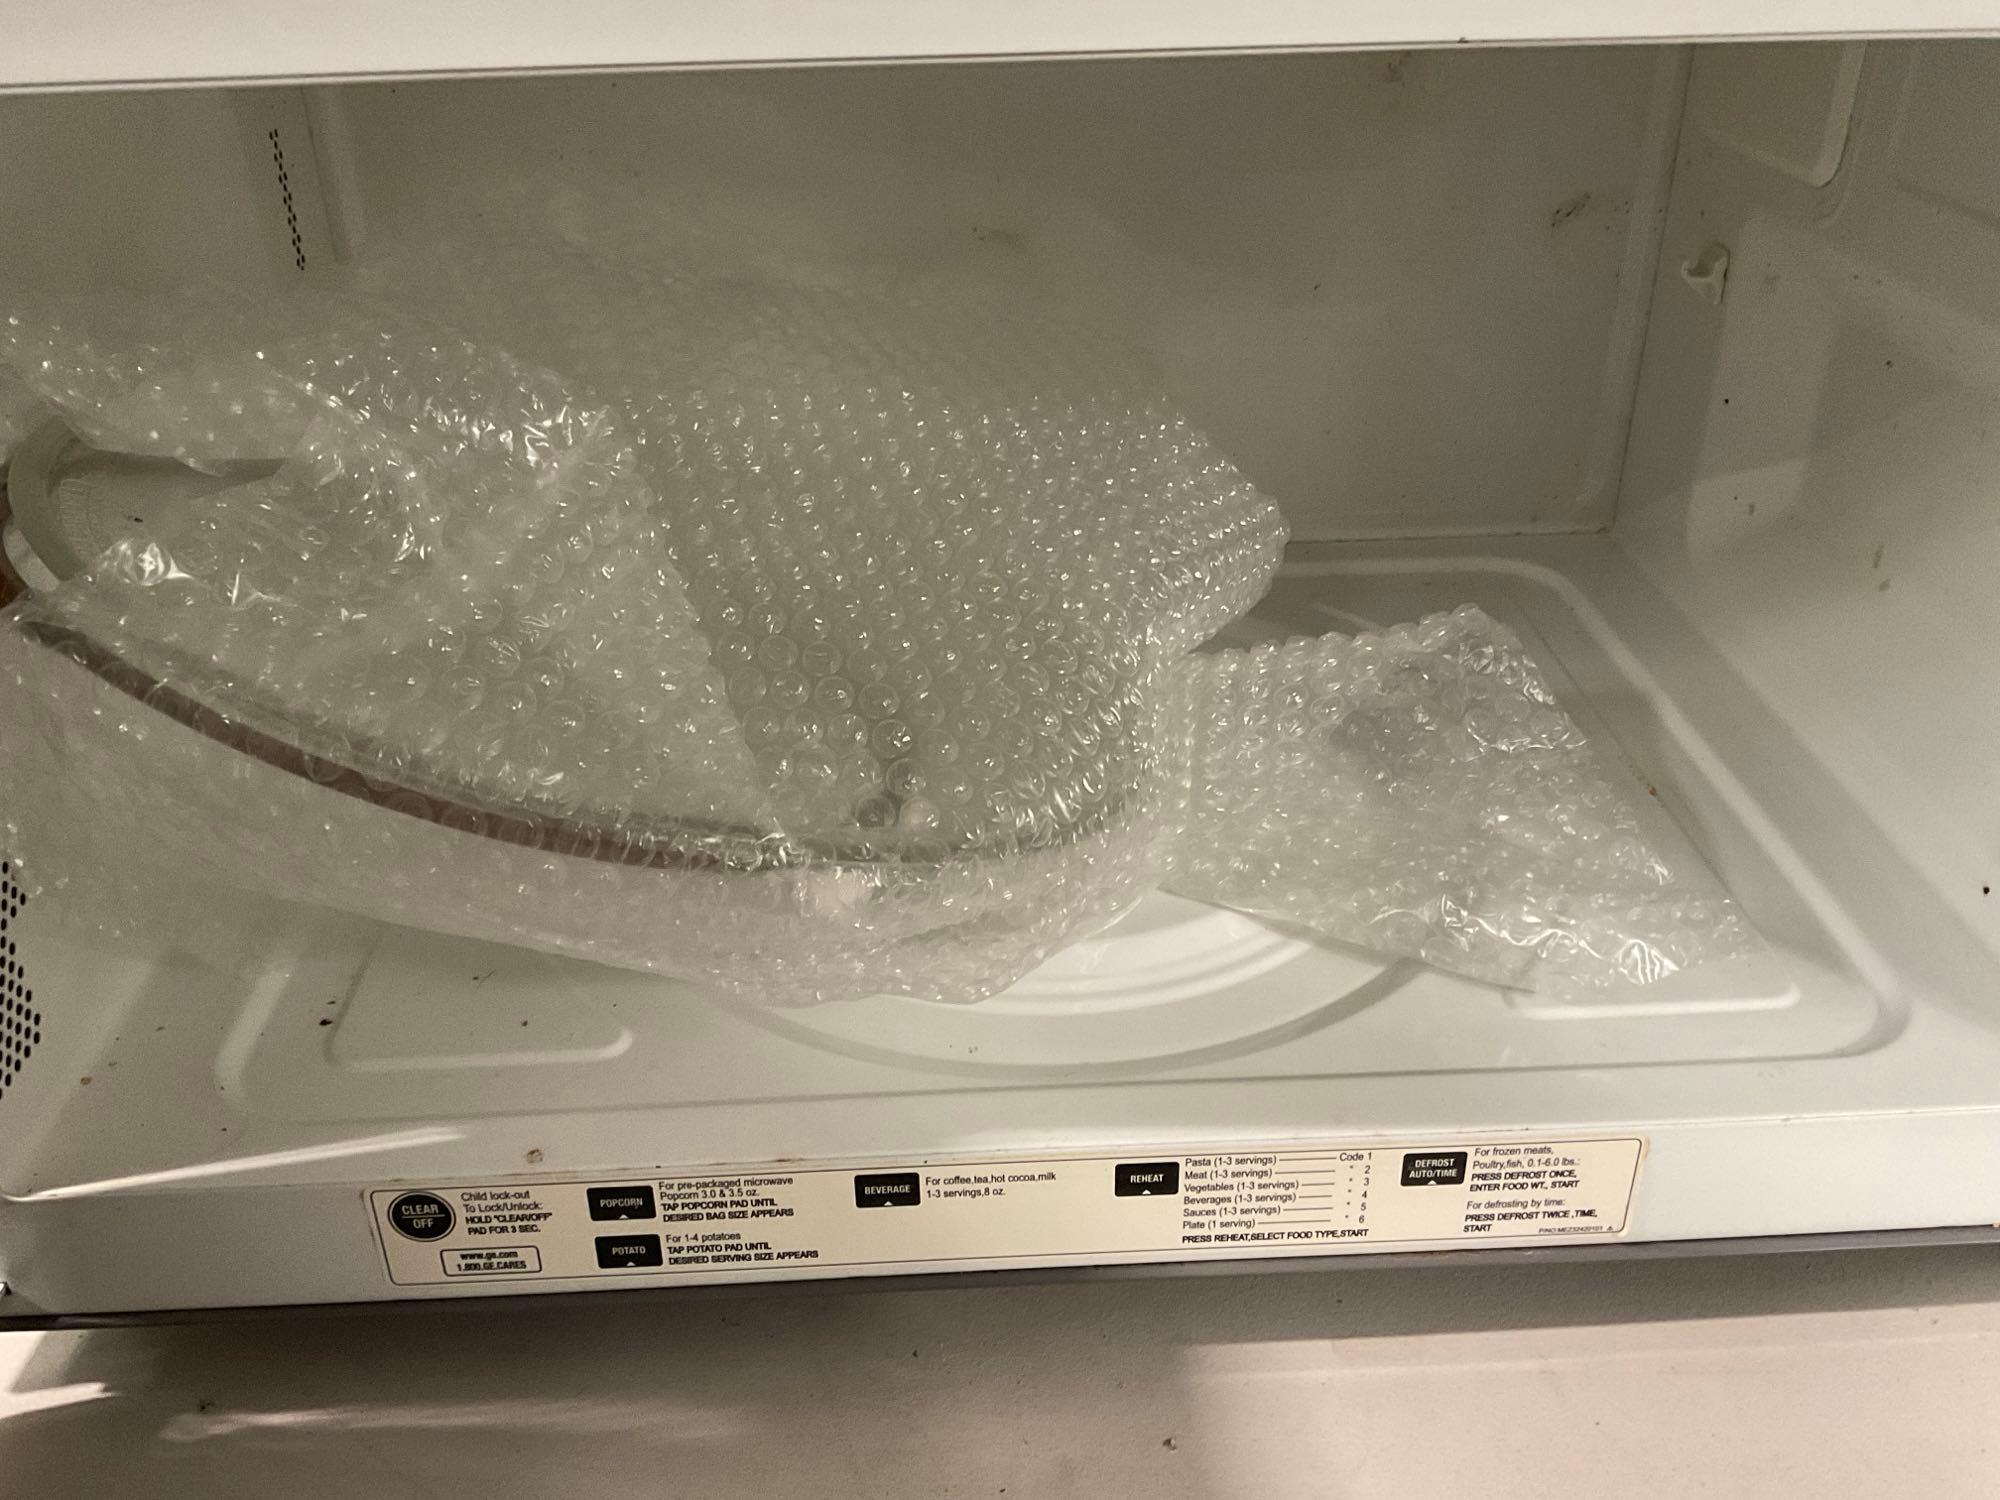 GE Spacemaker Over-the-Range Microwave